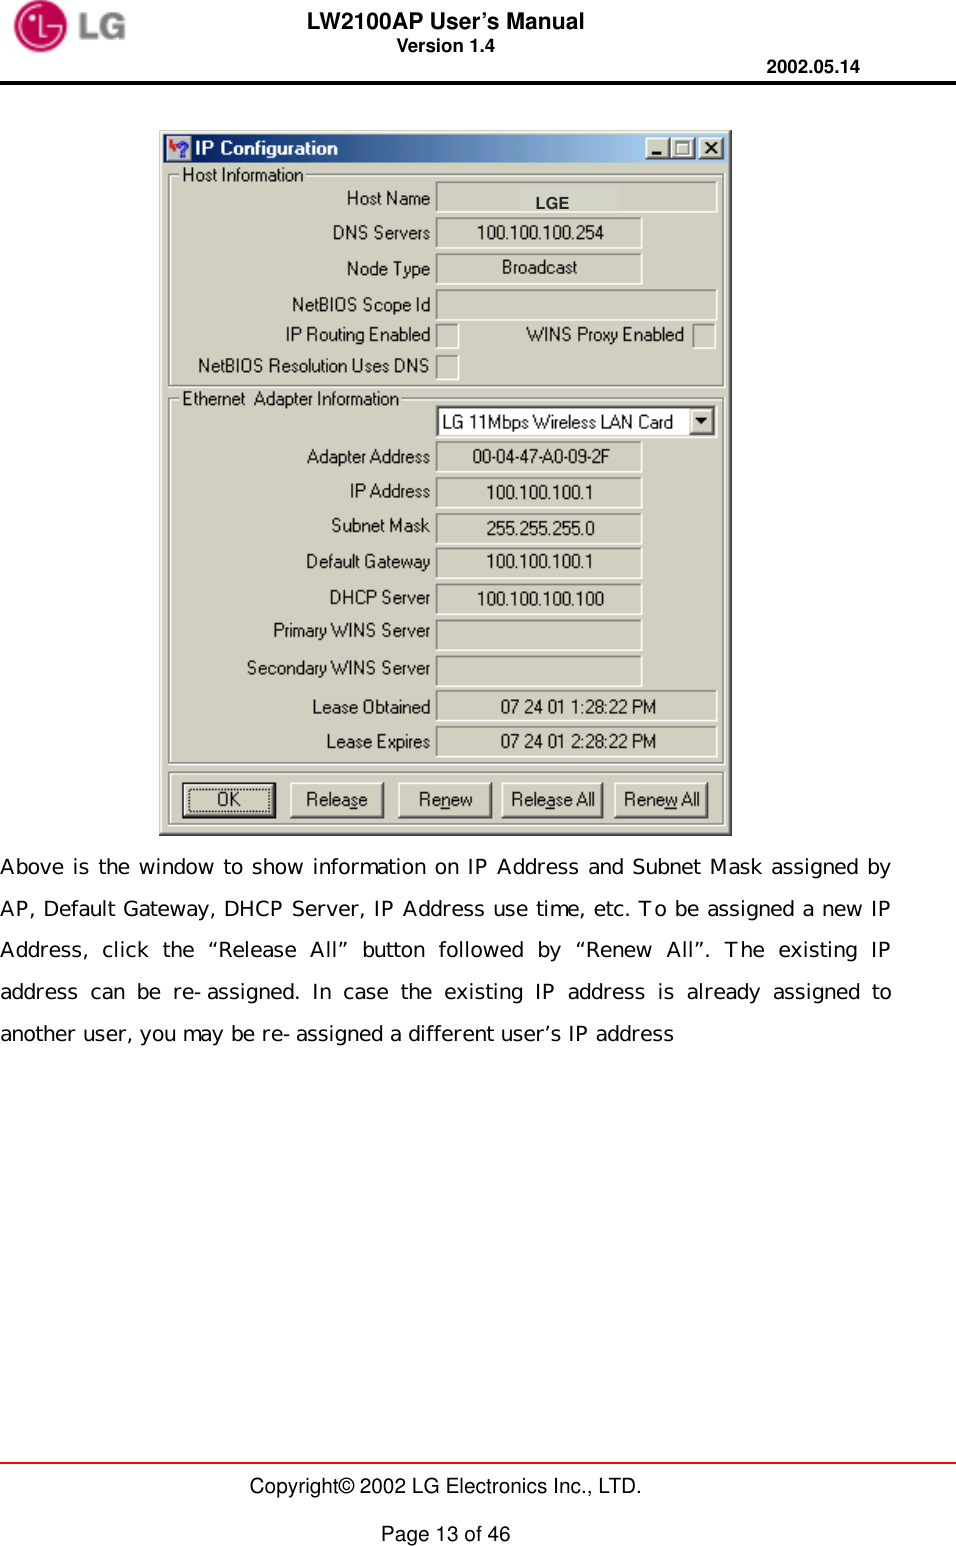 LW2100AP User’s Manual Version 1.4 2002.05.14   Copyright© 2002 LG Electronics Inc., LTD.  Page 13 of 46   Above is the window to show information on IP Address and Subnet Mask assigned by AP, Default Gateway, DHCP Server, IP Address use time, etc. To be assigned a new IP Address, click the “Release All” button followed by “Renew All”. The existing IP address can be re-assigned. In case the existing IP address is already assigned to another user, you may be re-assigned a different user’s IP address LGE